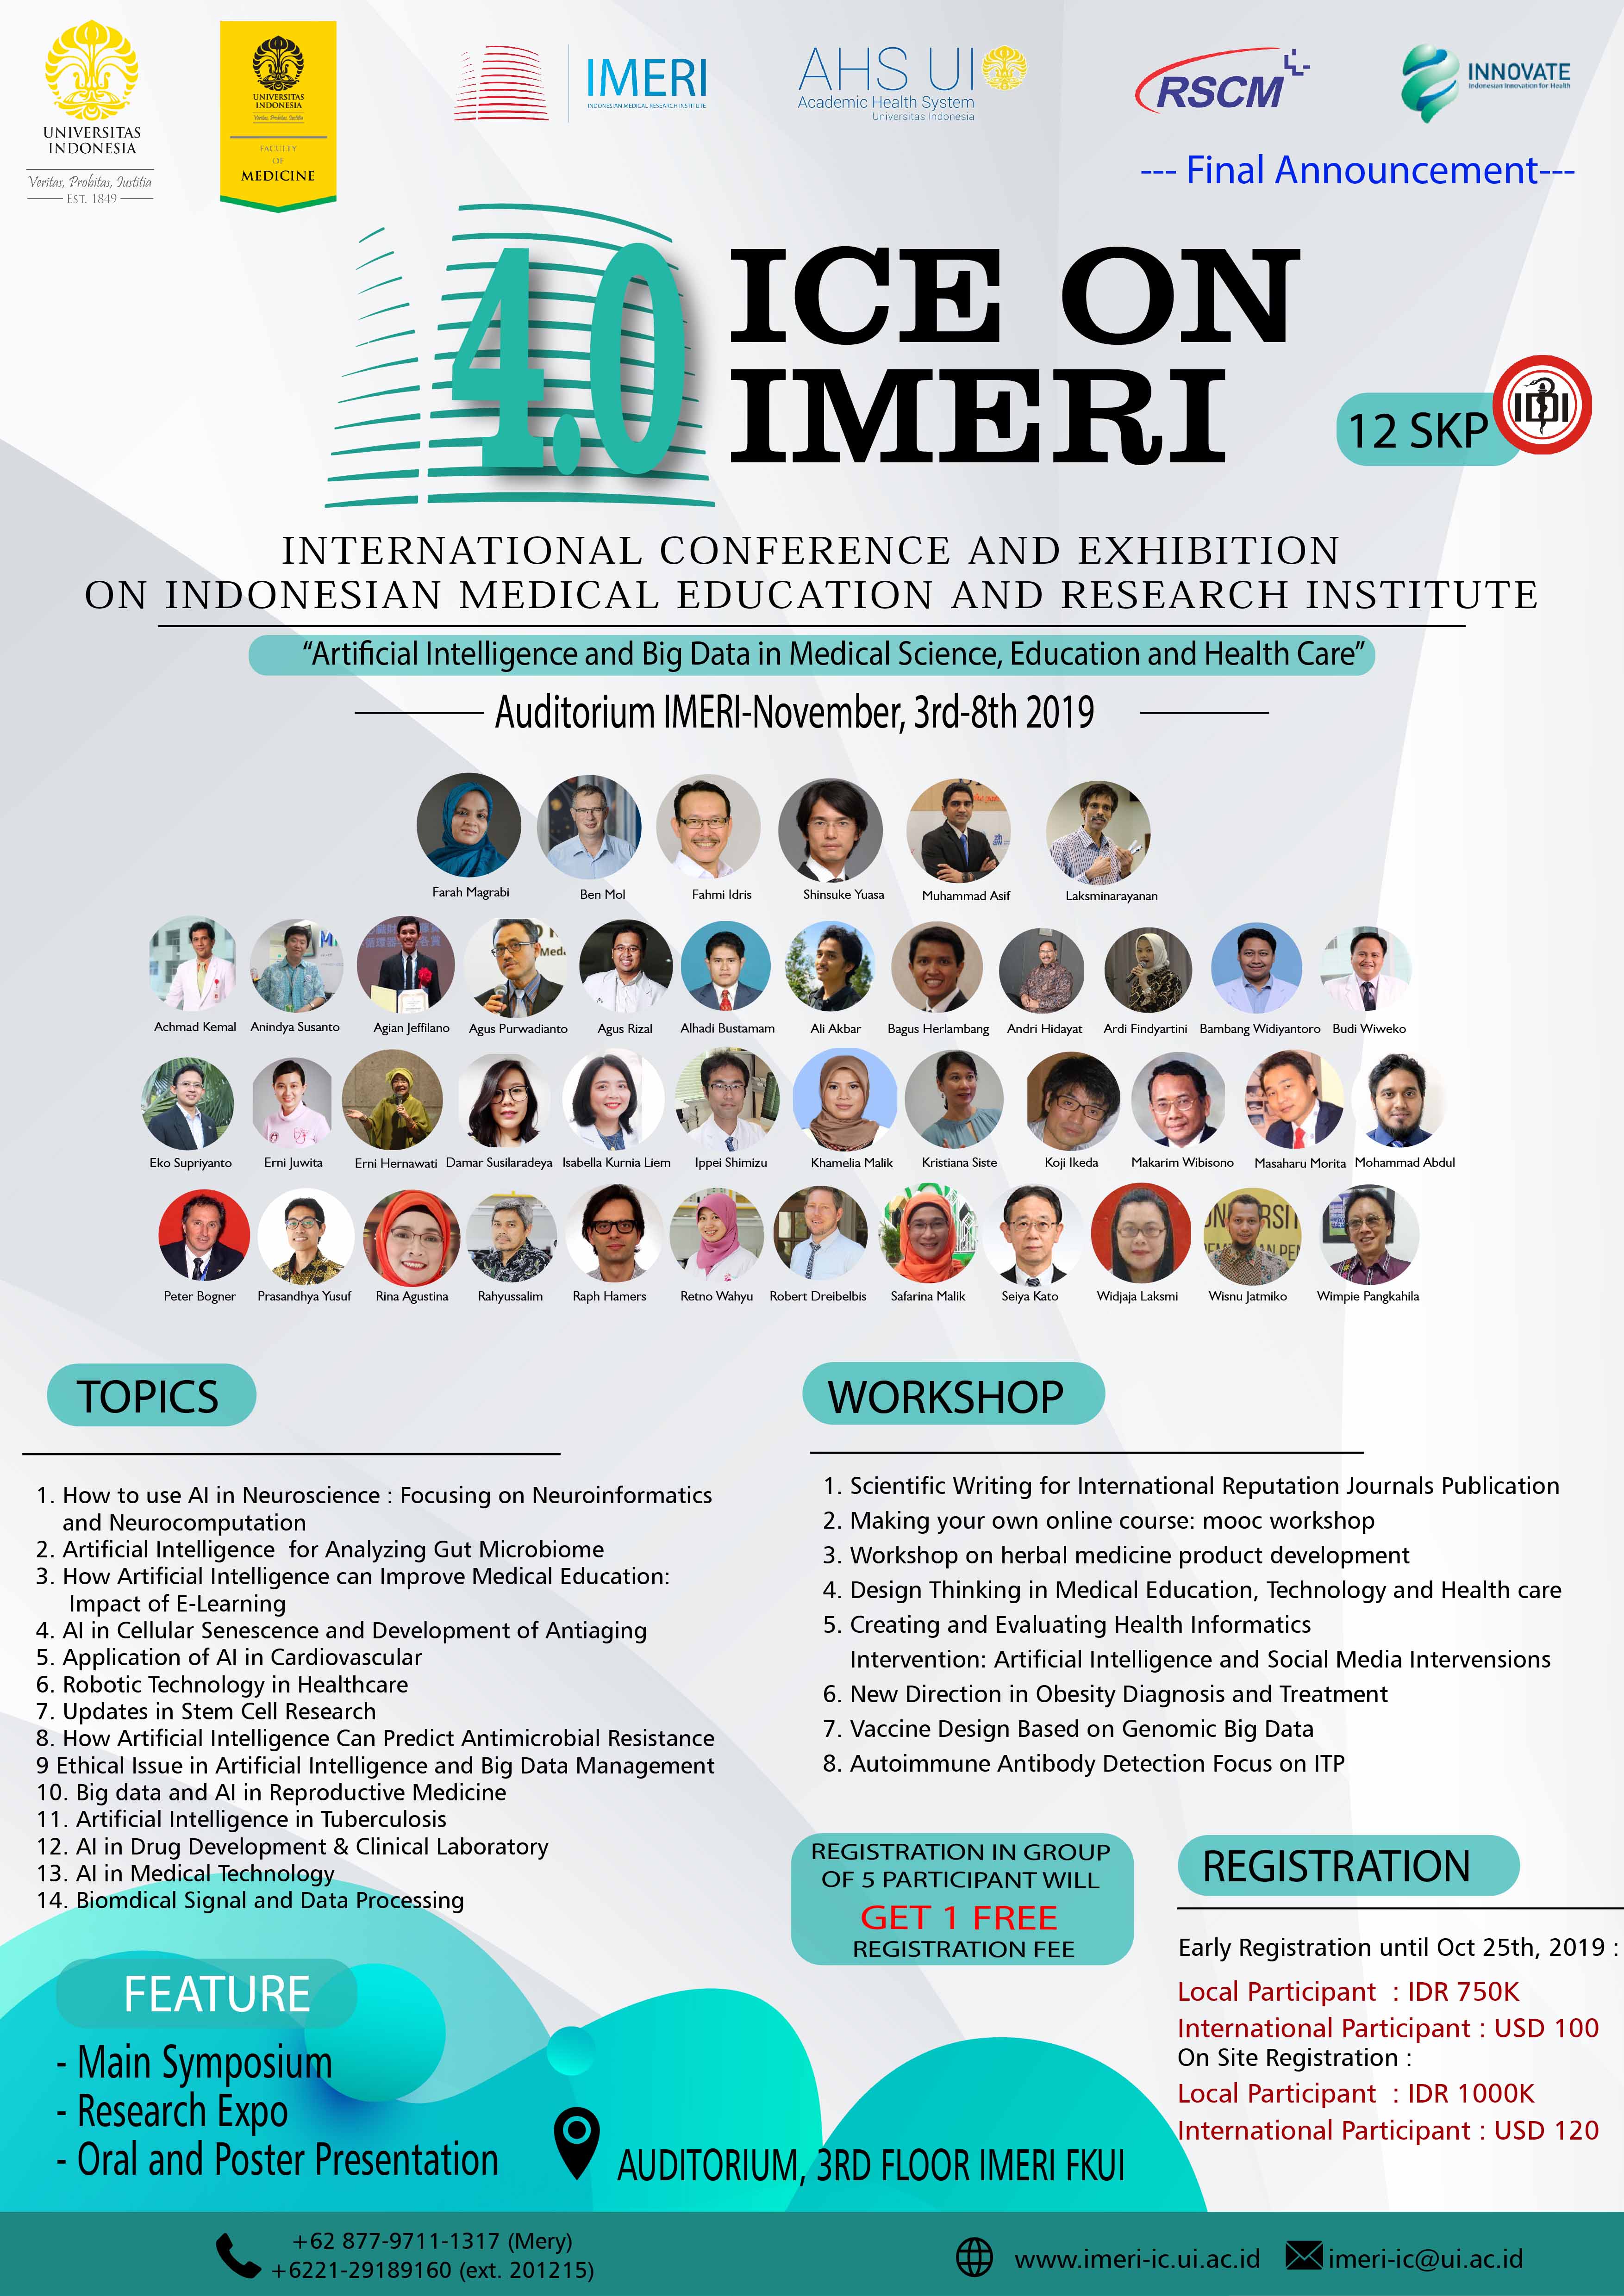 The 4th Annual International Conference And Exhibition On Imeri